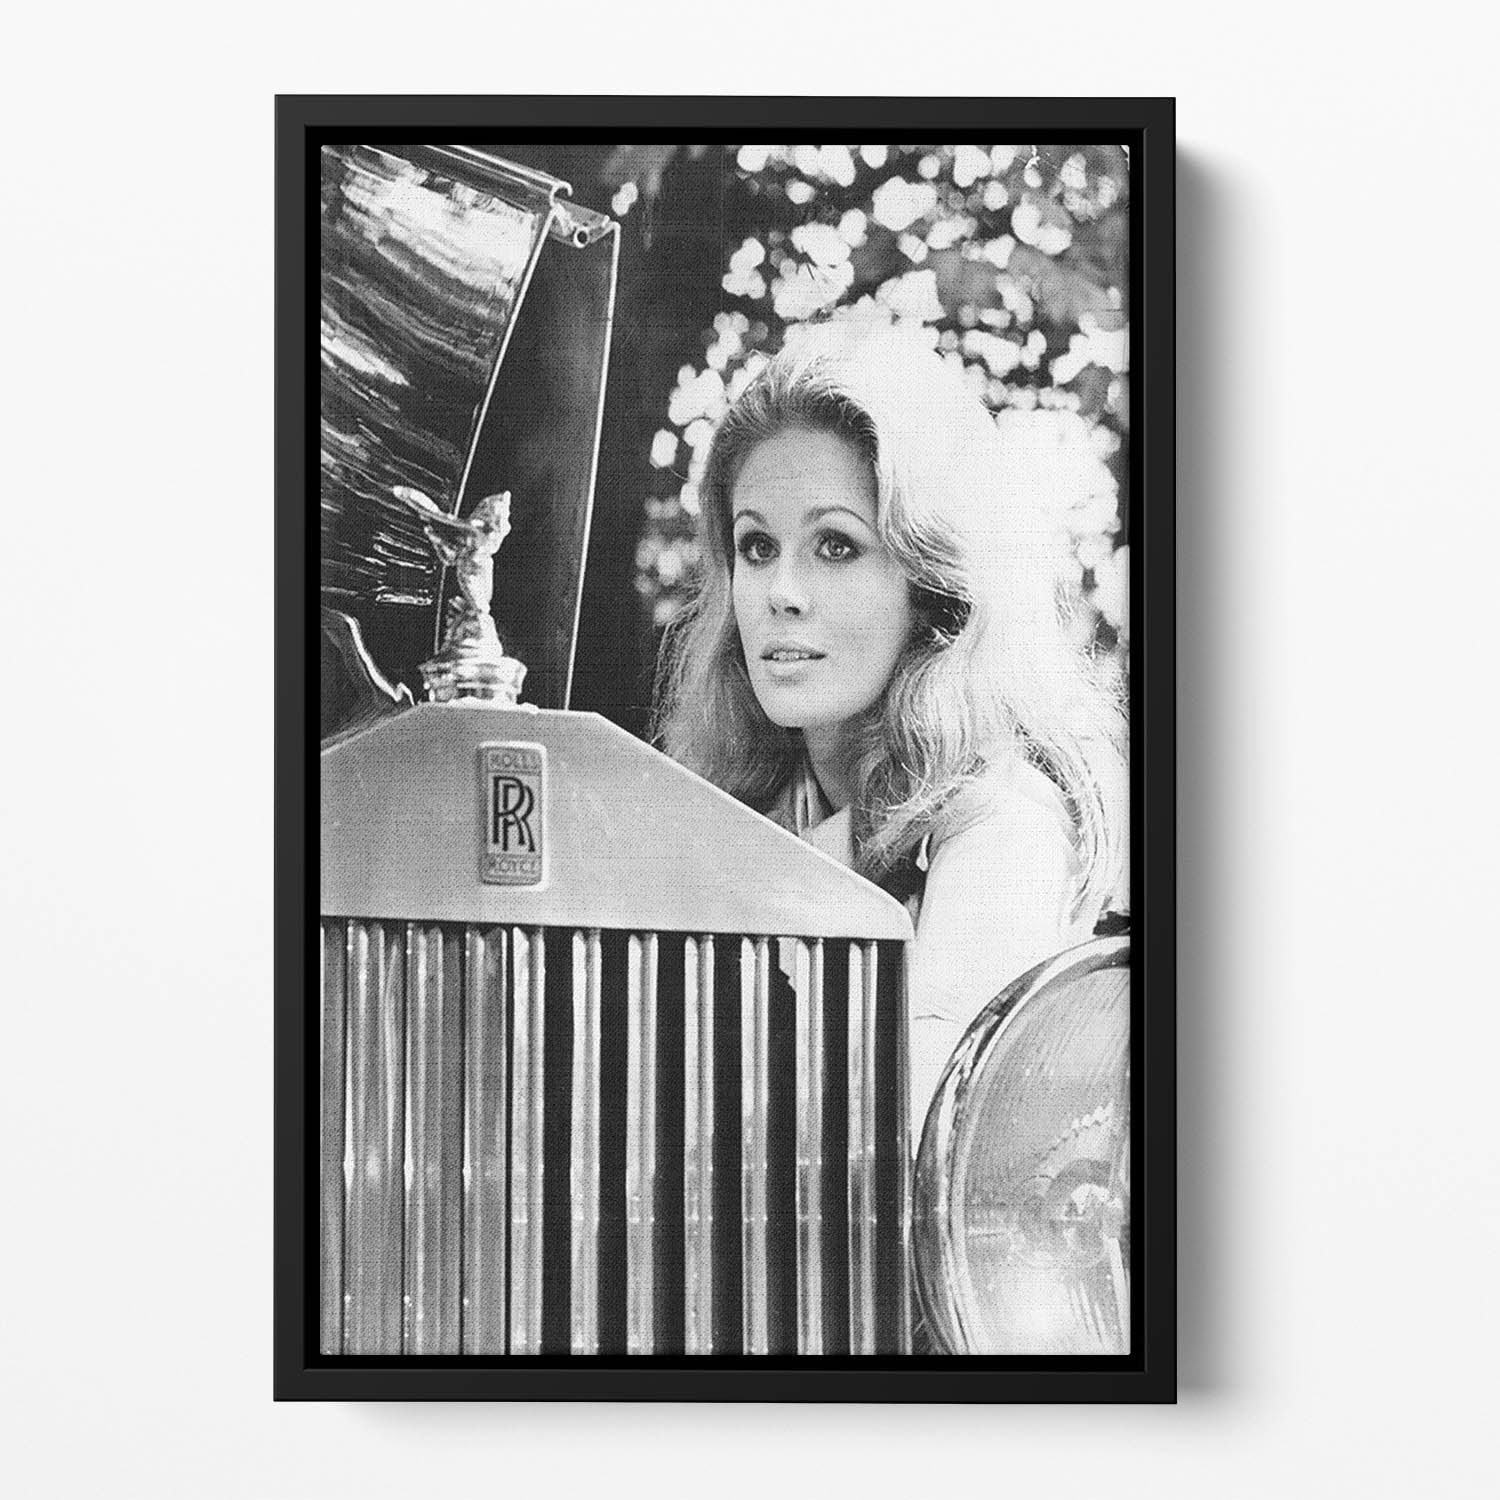 Joanna Lumley with her Rolls Royce Floating Framed Canvas